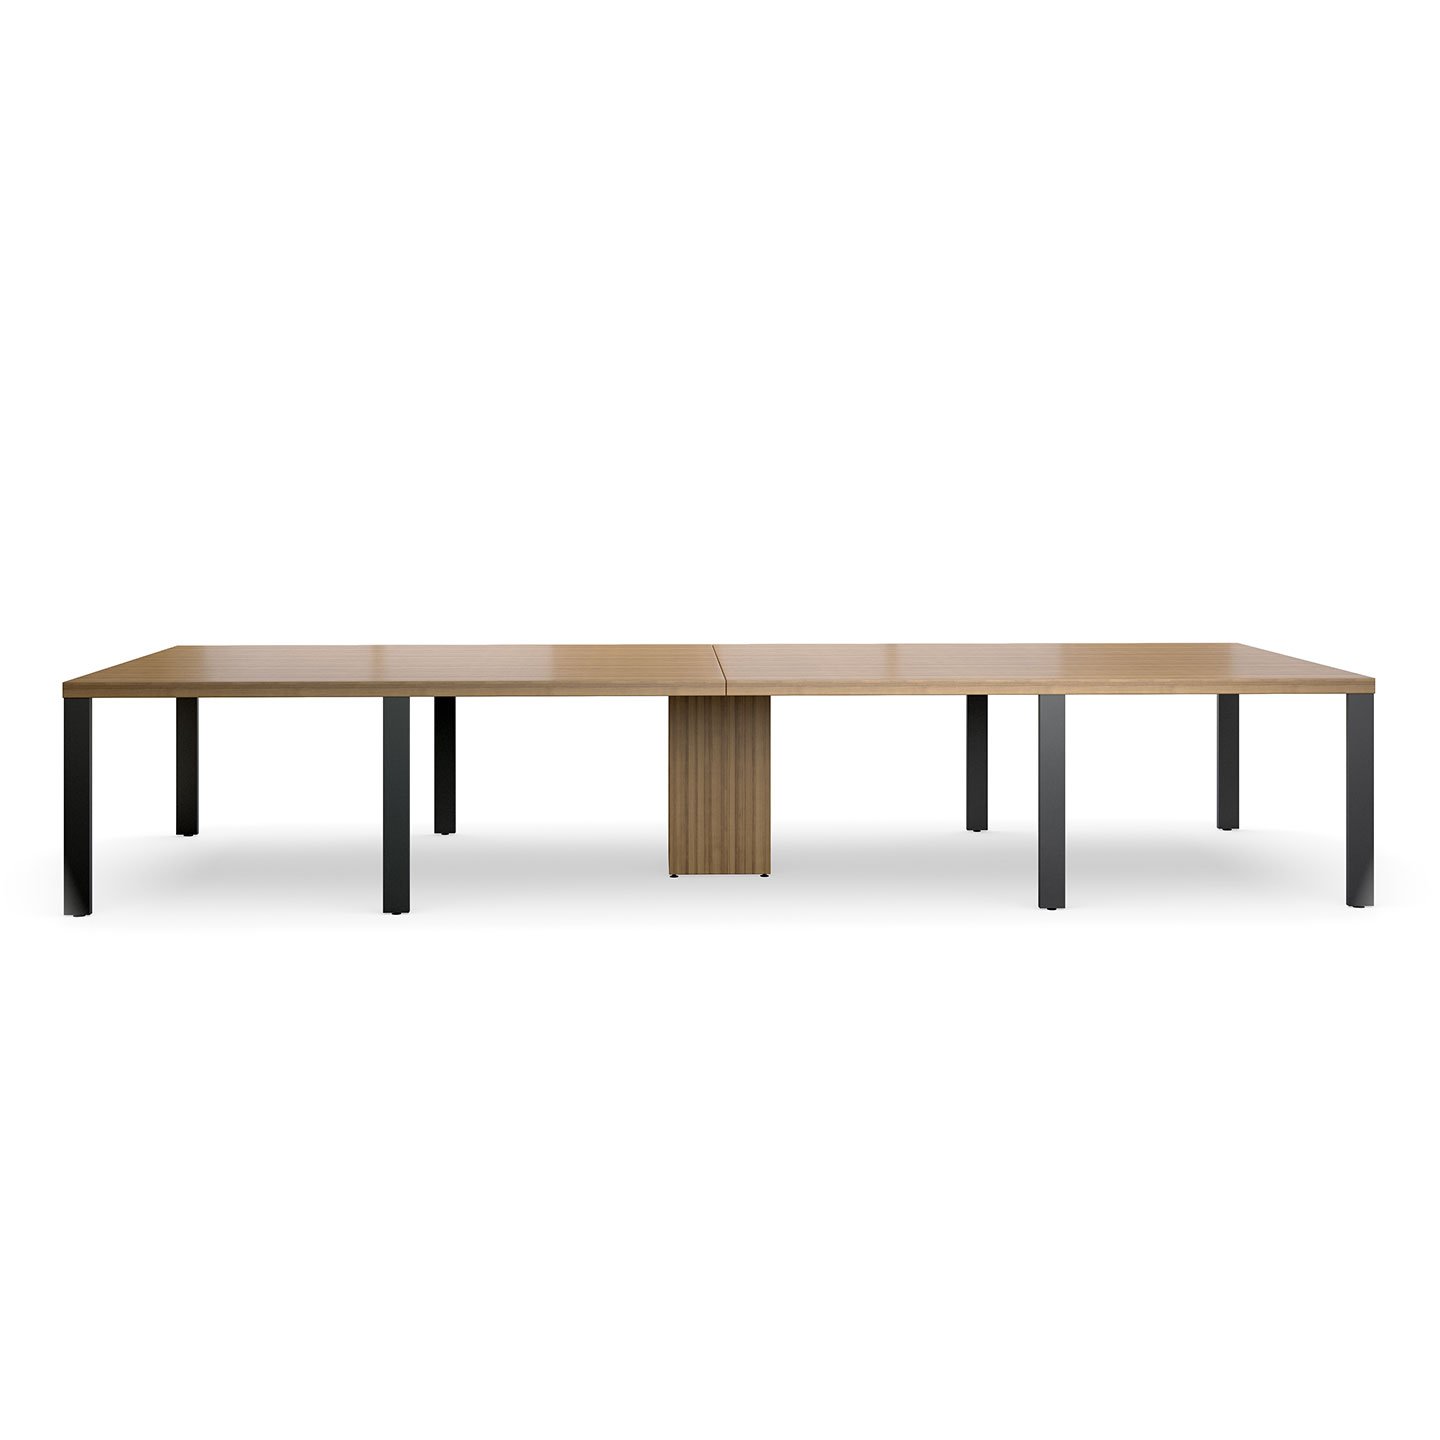 Haworth Planes Conference Table with a veneer top and black legs